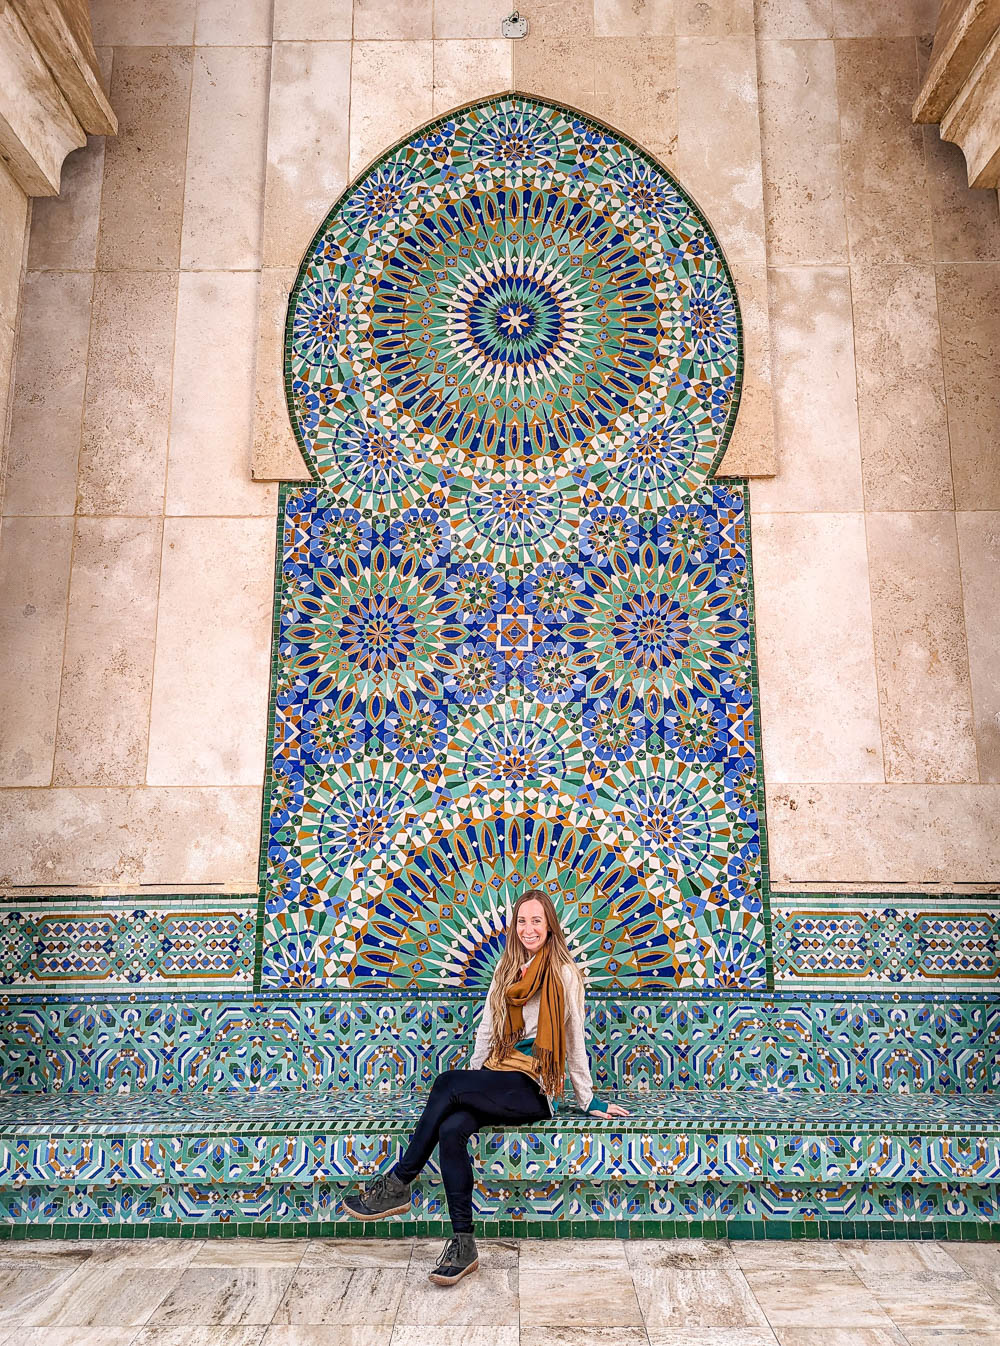 tiny woman sitting in front of a large green mosaic